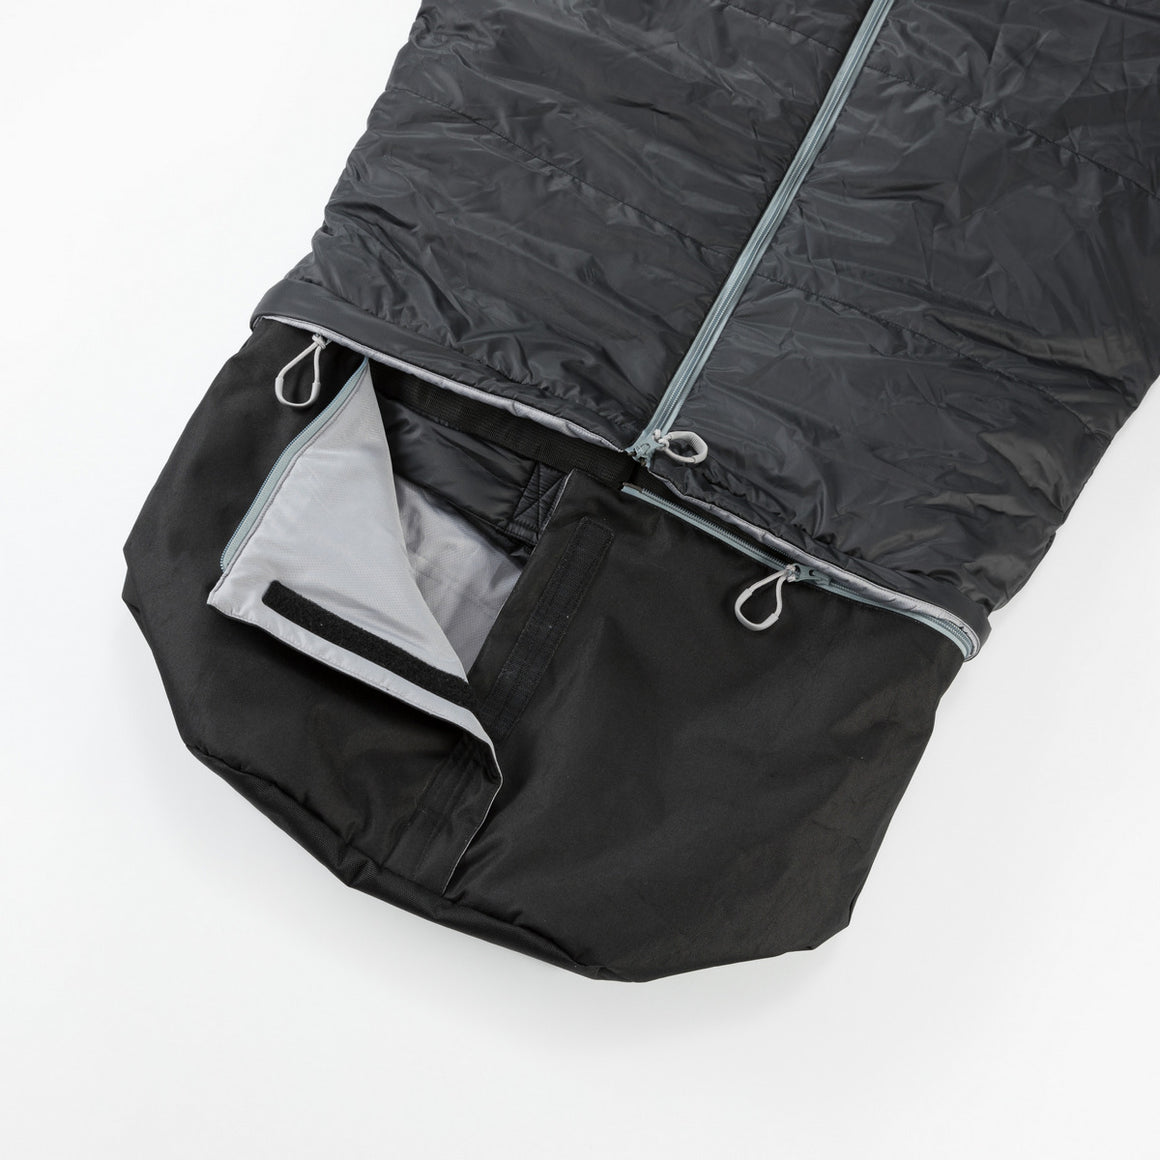 CozyBag Zippy by Bergstop: extra large wearable sleeping bag 